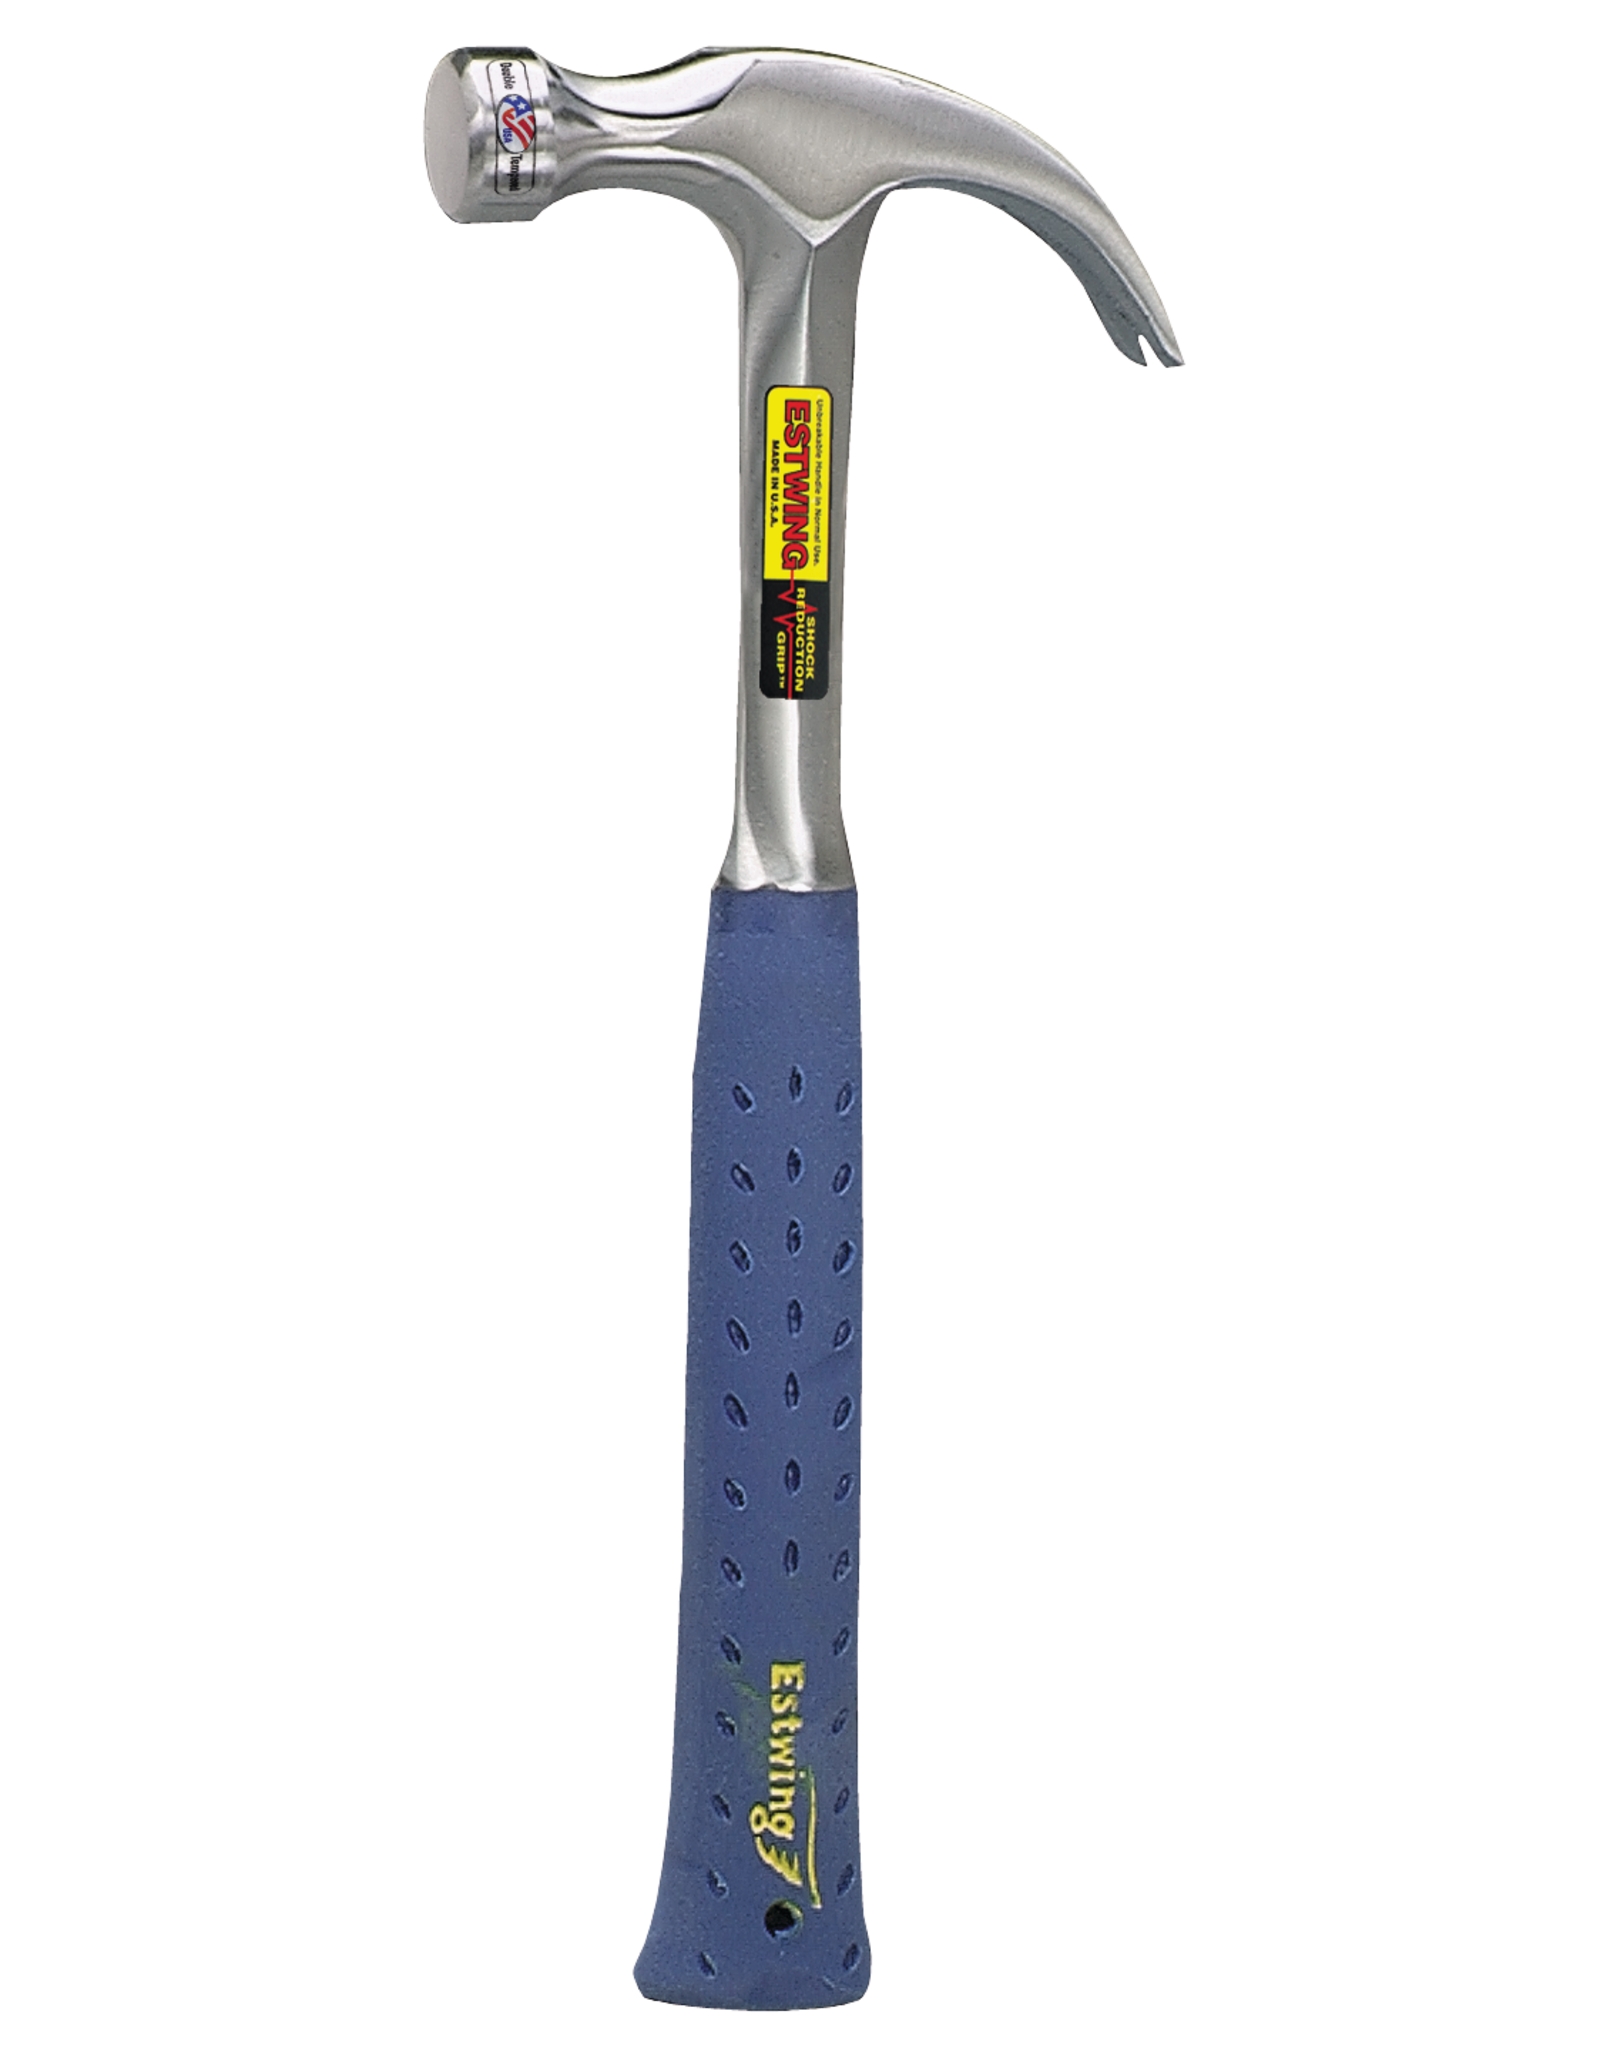 Estwing Estwing E3-16C Curved Claw Hammer, 16 oz Head, Steel Head, 13 in OAL, Blue Handle*